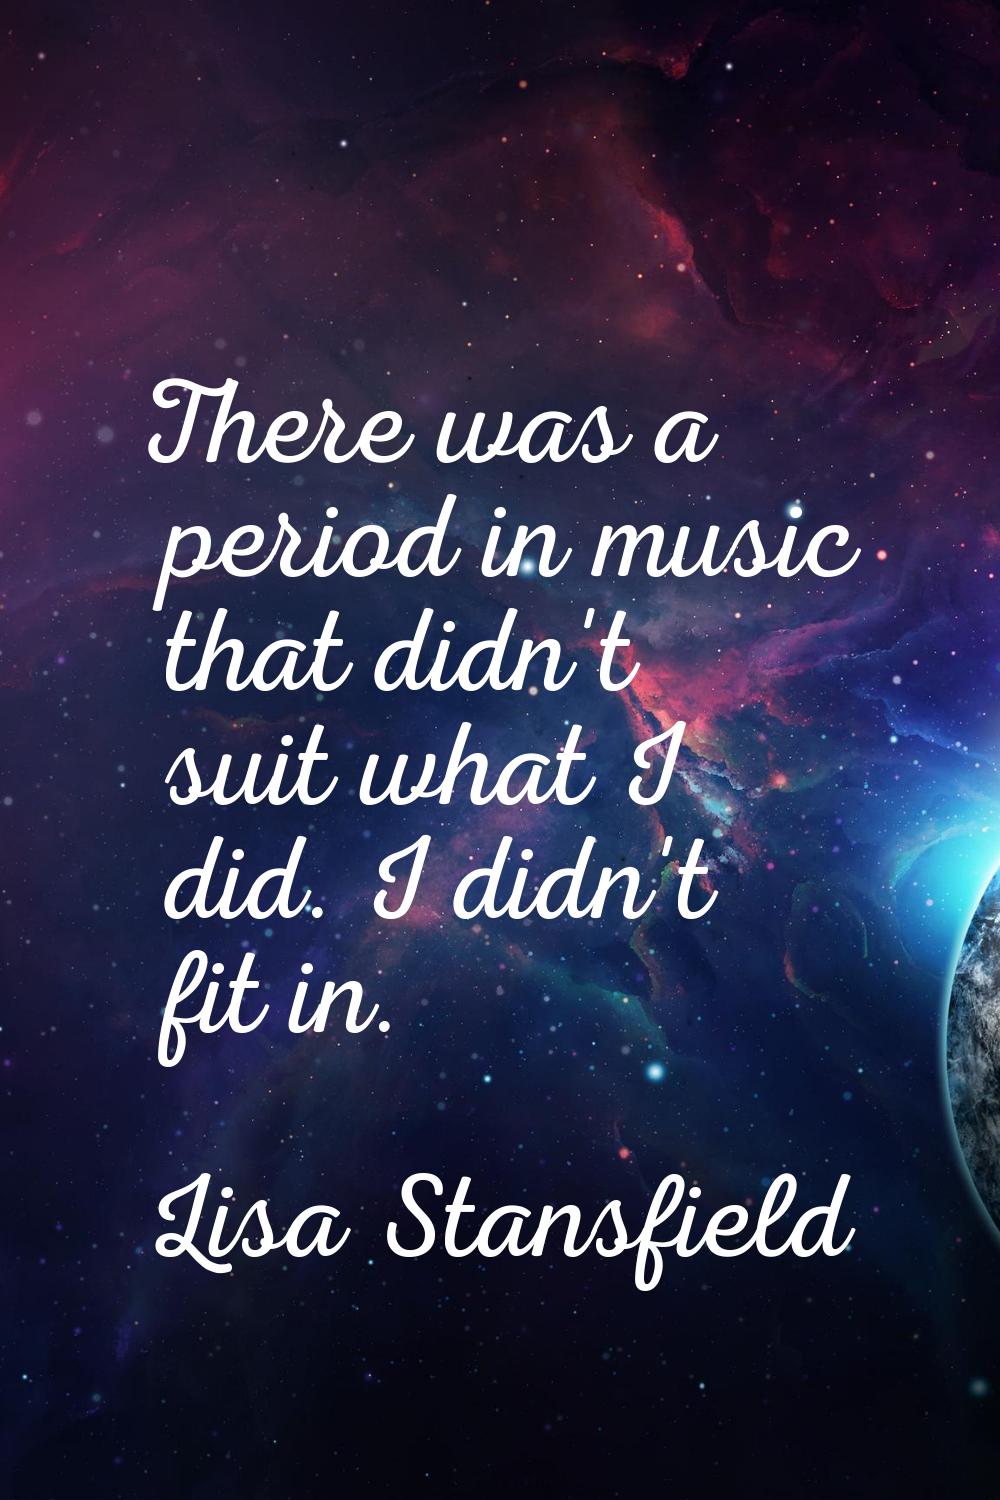 There was a period in music that didn't suit what I did. I didn't fit in.